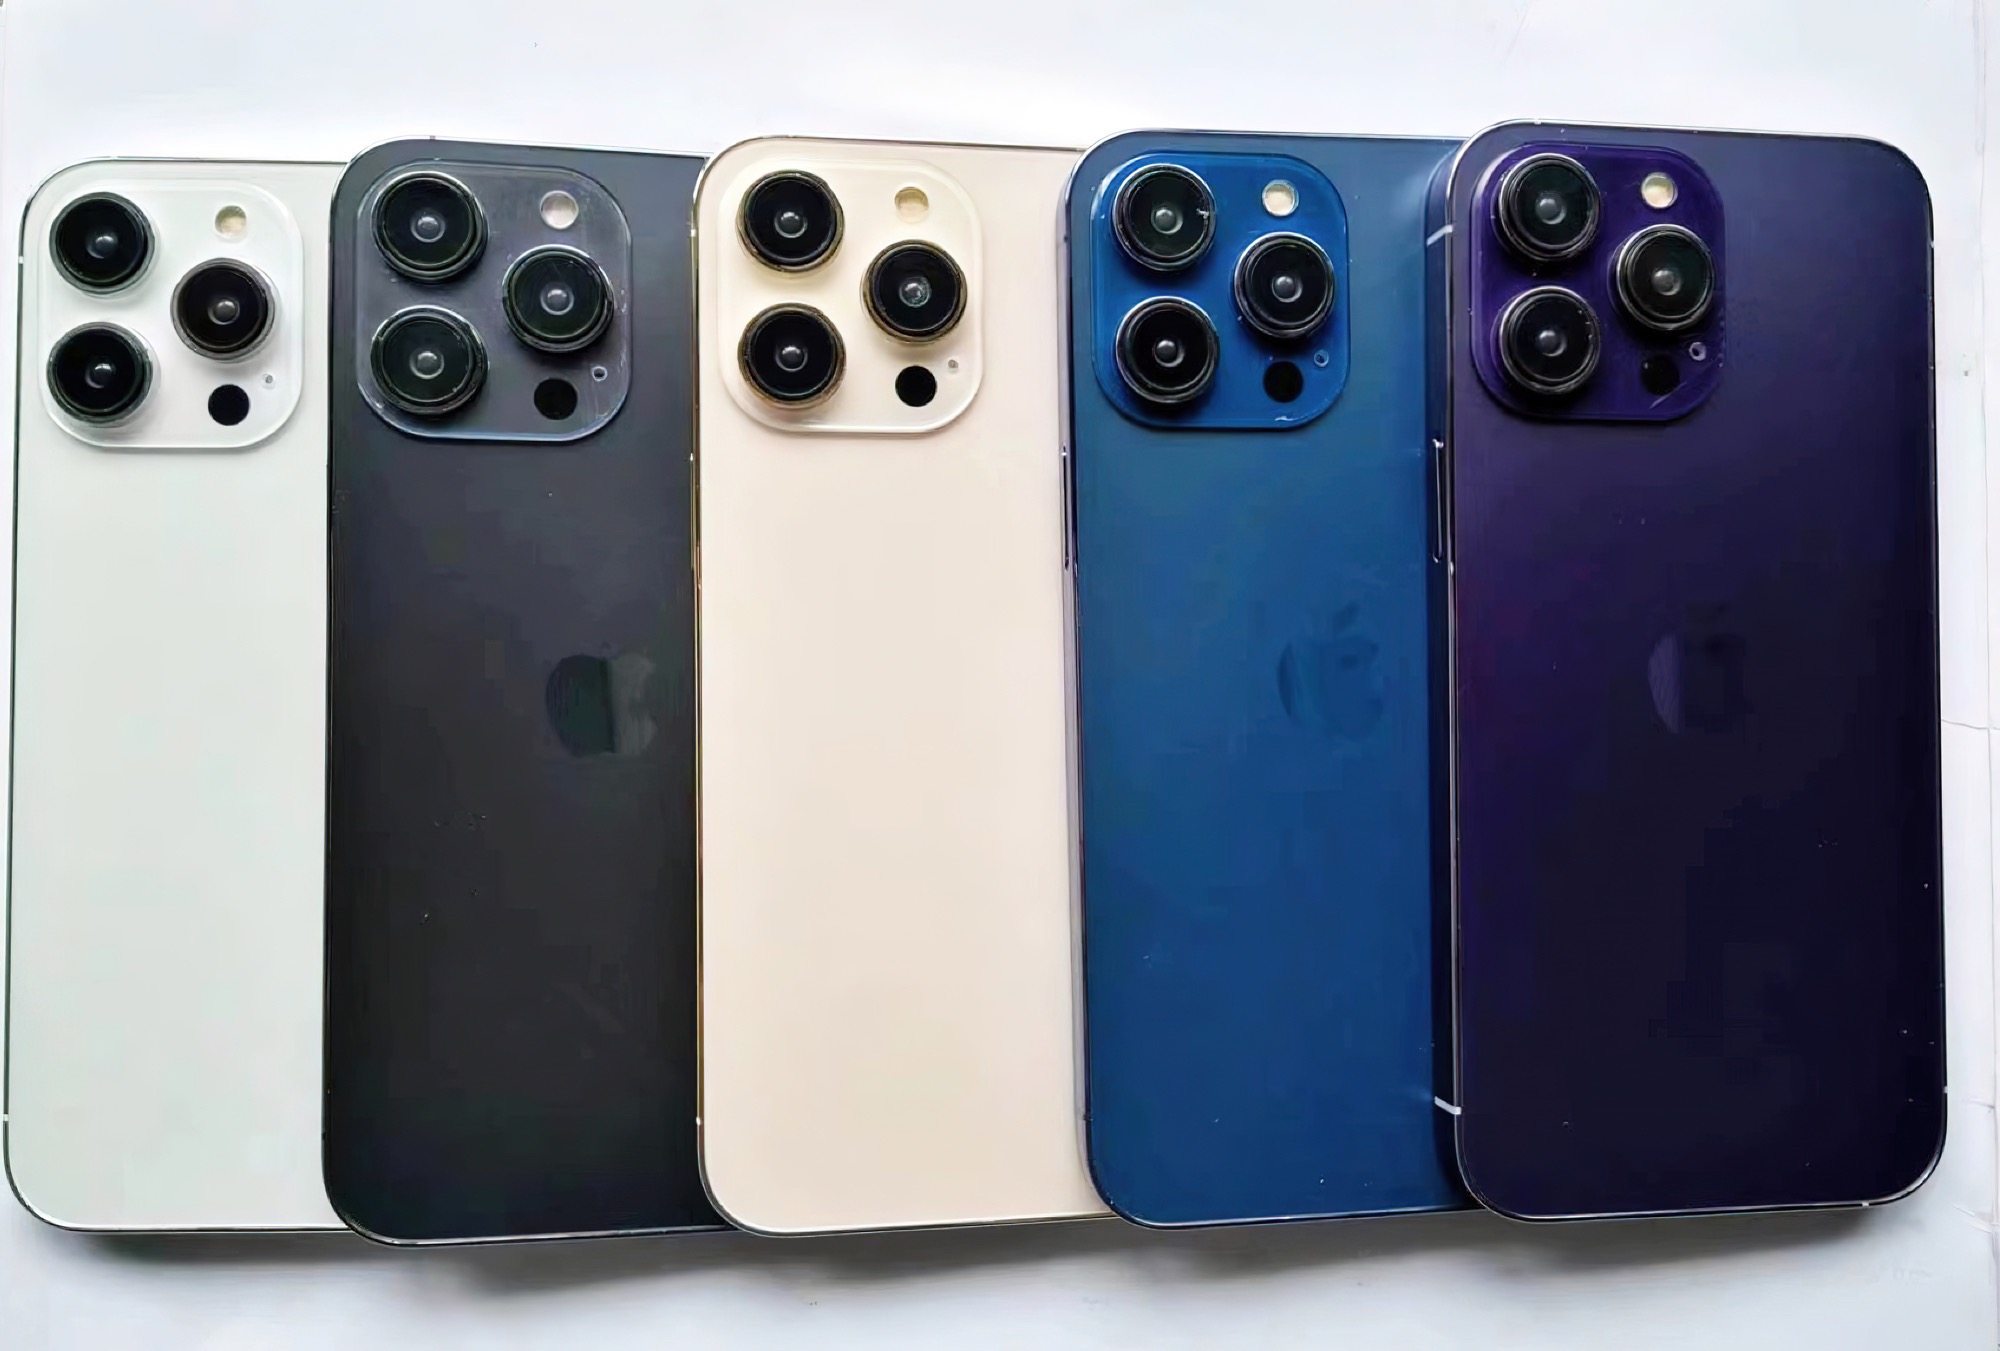 Alleged iPhone 14 Pro colors shown in new dummy pictures and video